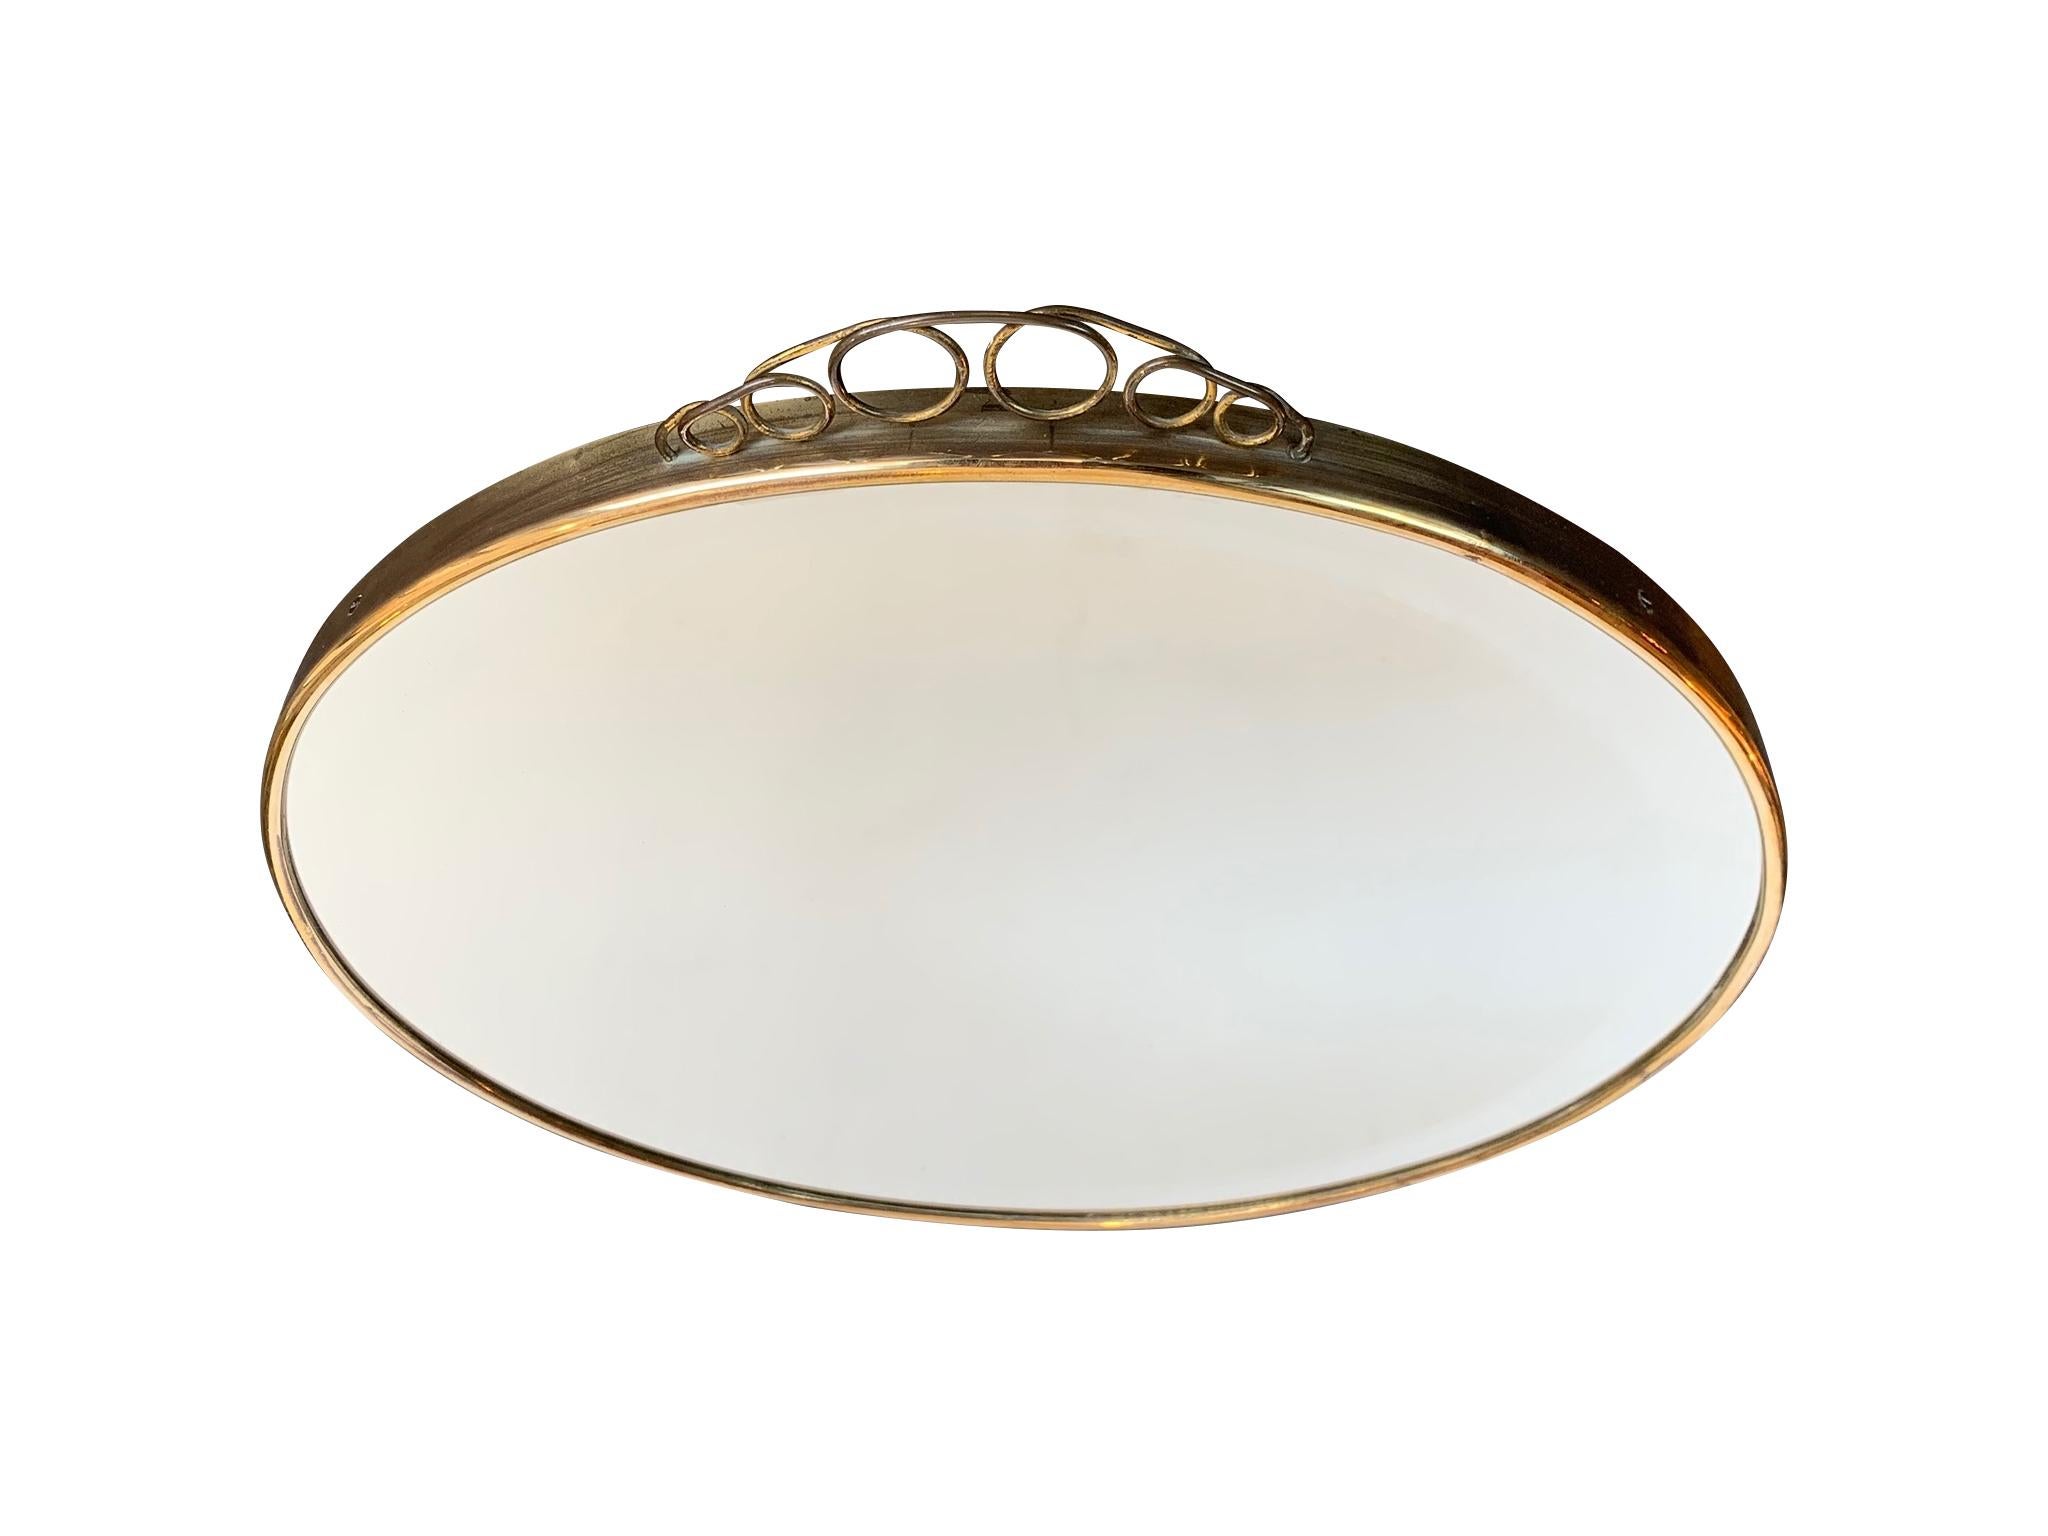 Beveled 1950s Italian Circular Mirror with Bevelled Glass, Brass Frame and Top Detail